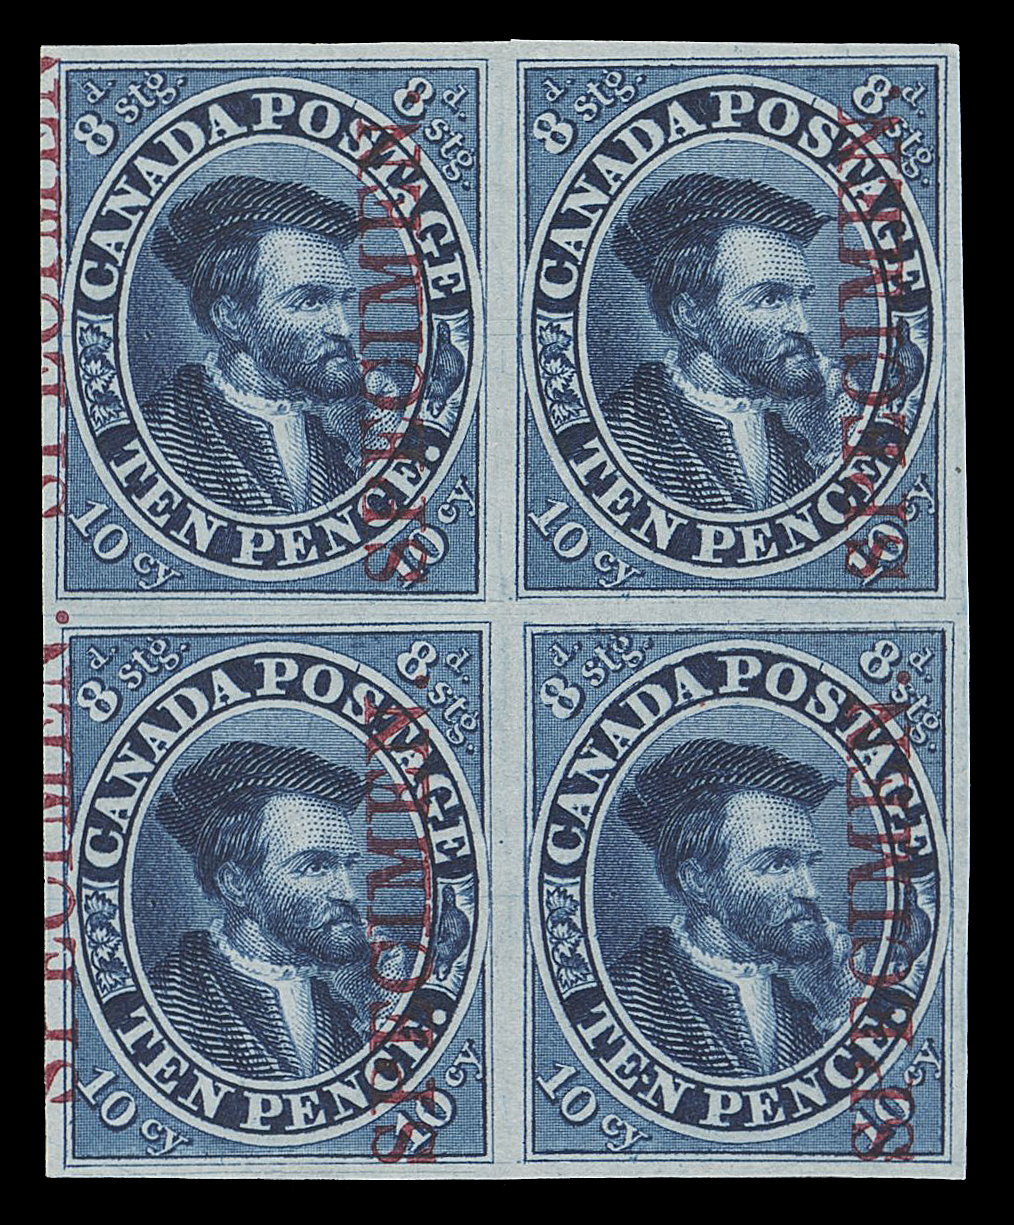 TEN PENCE AND SEVENTEEN CENTS  7Pi + variety,Plate proof block in the issued colour on india paper, vertical SPECIMEN overprint in carmine. Shows "extra" column of SPECIMEN overprint along left edge of the block, being Positions 55-56 / 67-68 on the plate of 120 subjects with Major Re-entry (Position 68) on lower right proof, displaying noticeable doubling in upper corners "8stg", along horizontal framelines, in "NADA" of "CANADA" and other traits, VF (Unitrade cat. as normal proofs)

For no valid reason and to our surprise, this major plate variety is currently unlisted in specialized listings and websites.

Provenance: Henry Gates (Part 1), Maresch Sale 124, March 1981; Lot 323